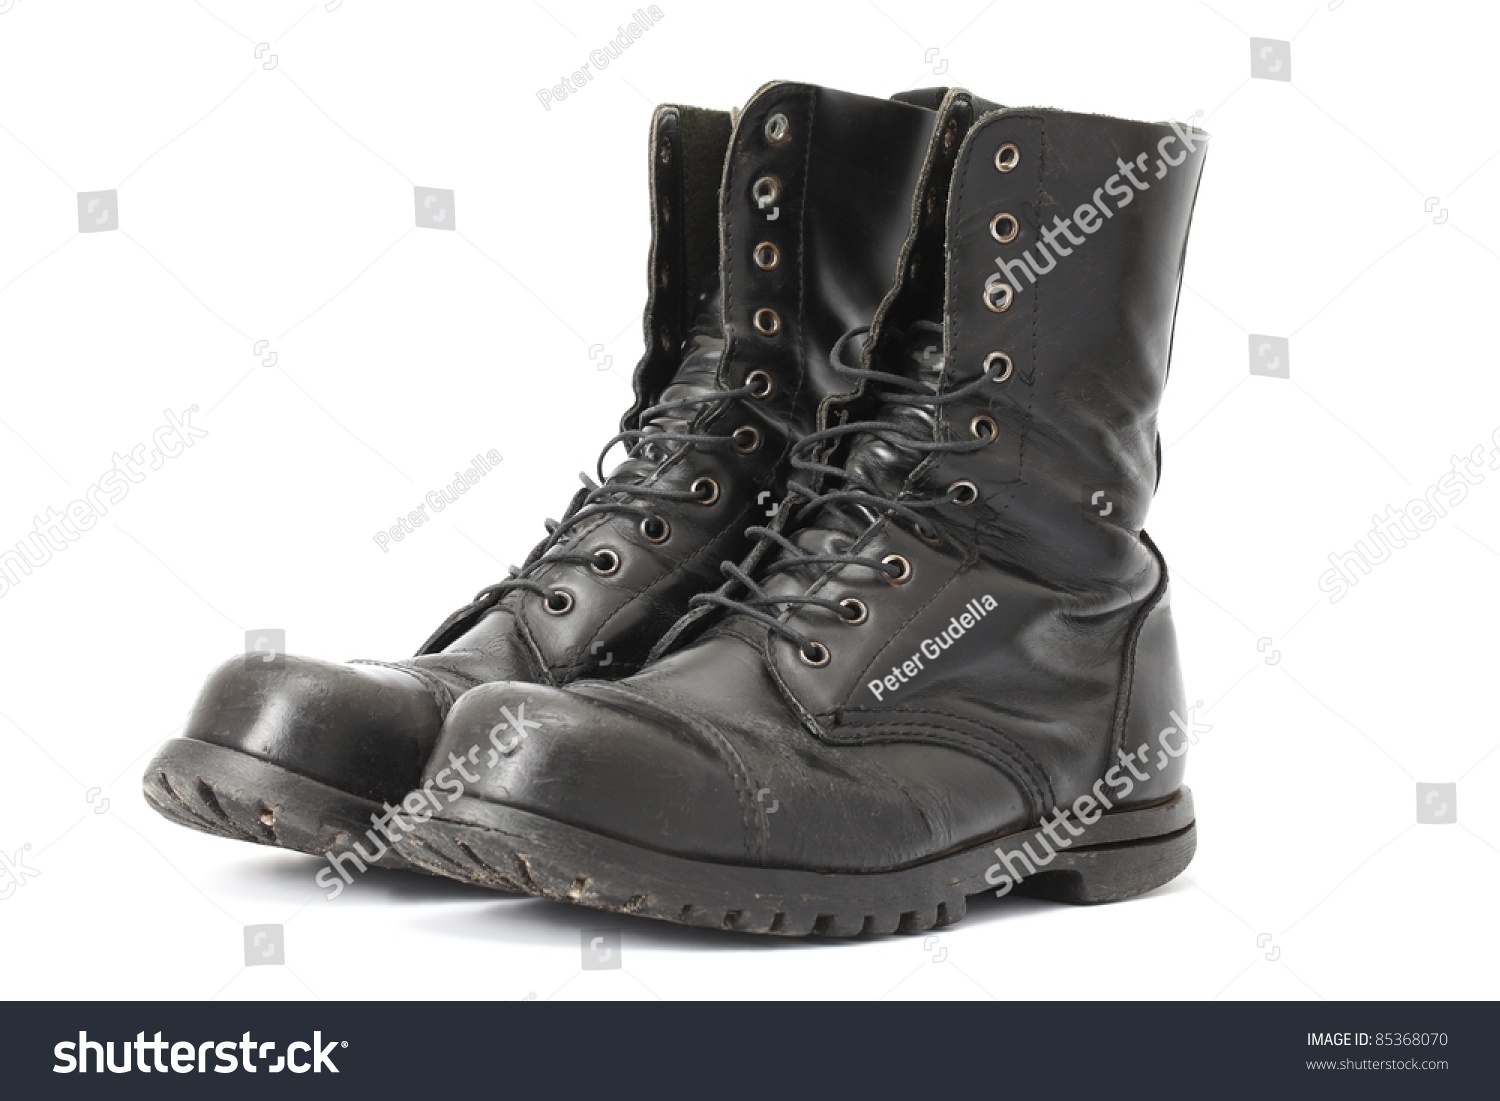 A Pair Of Steelcap Leather Boots Stock Photo 85368070 : Shutterstock